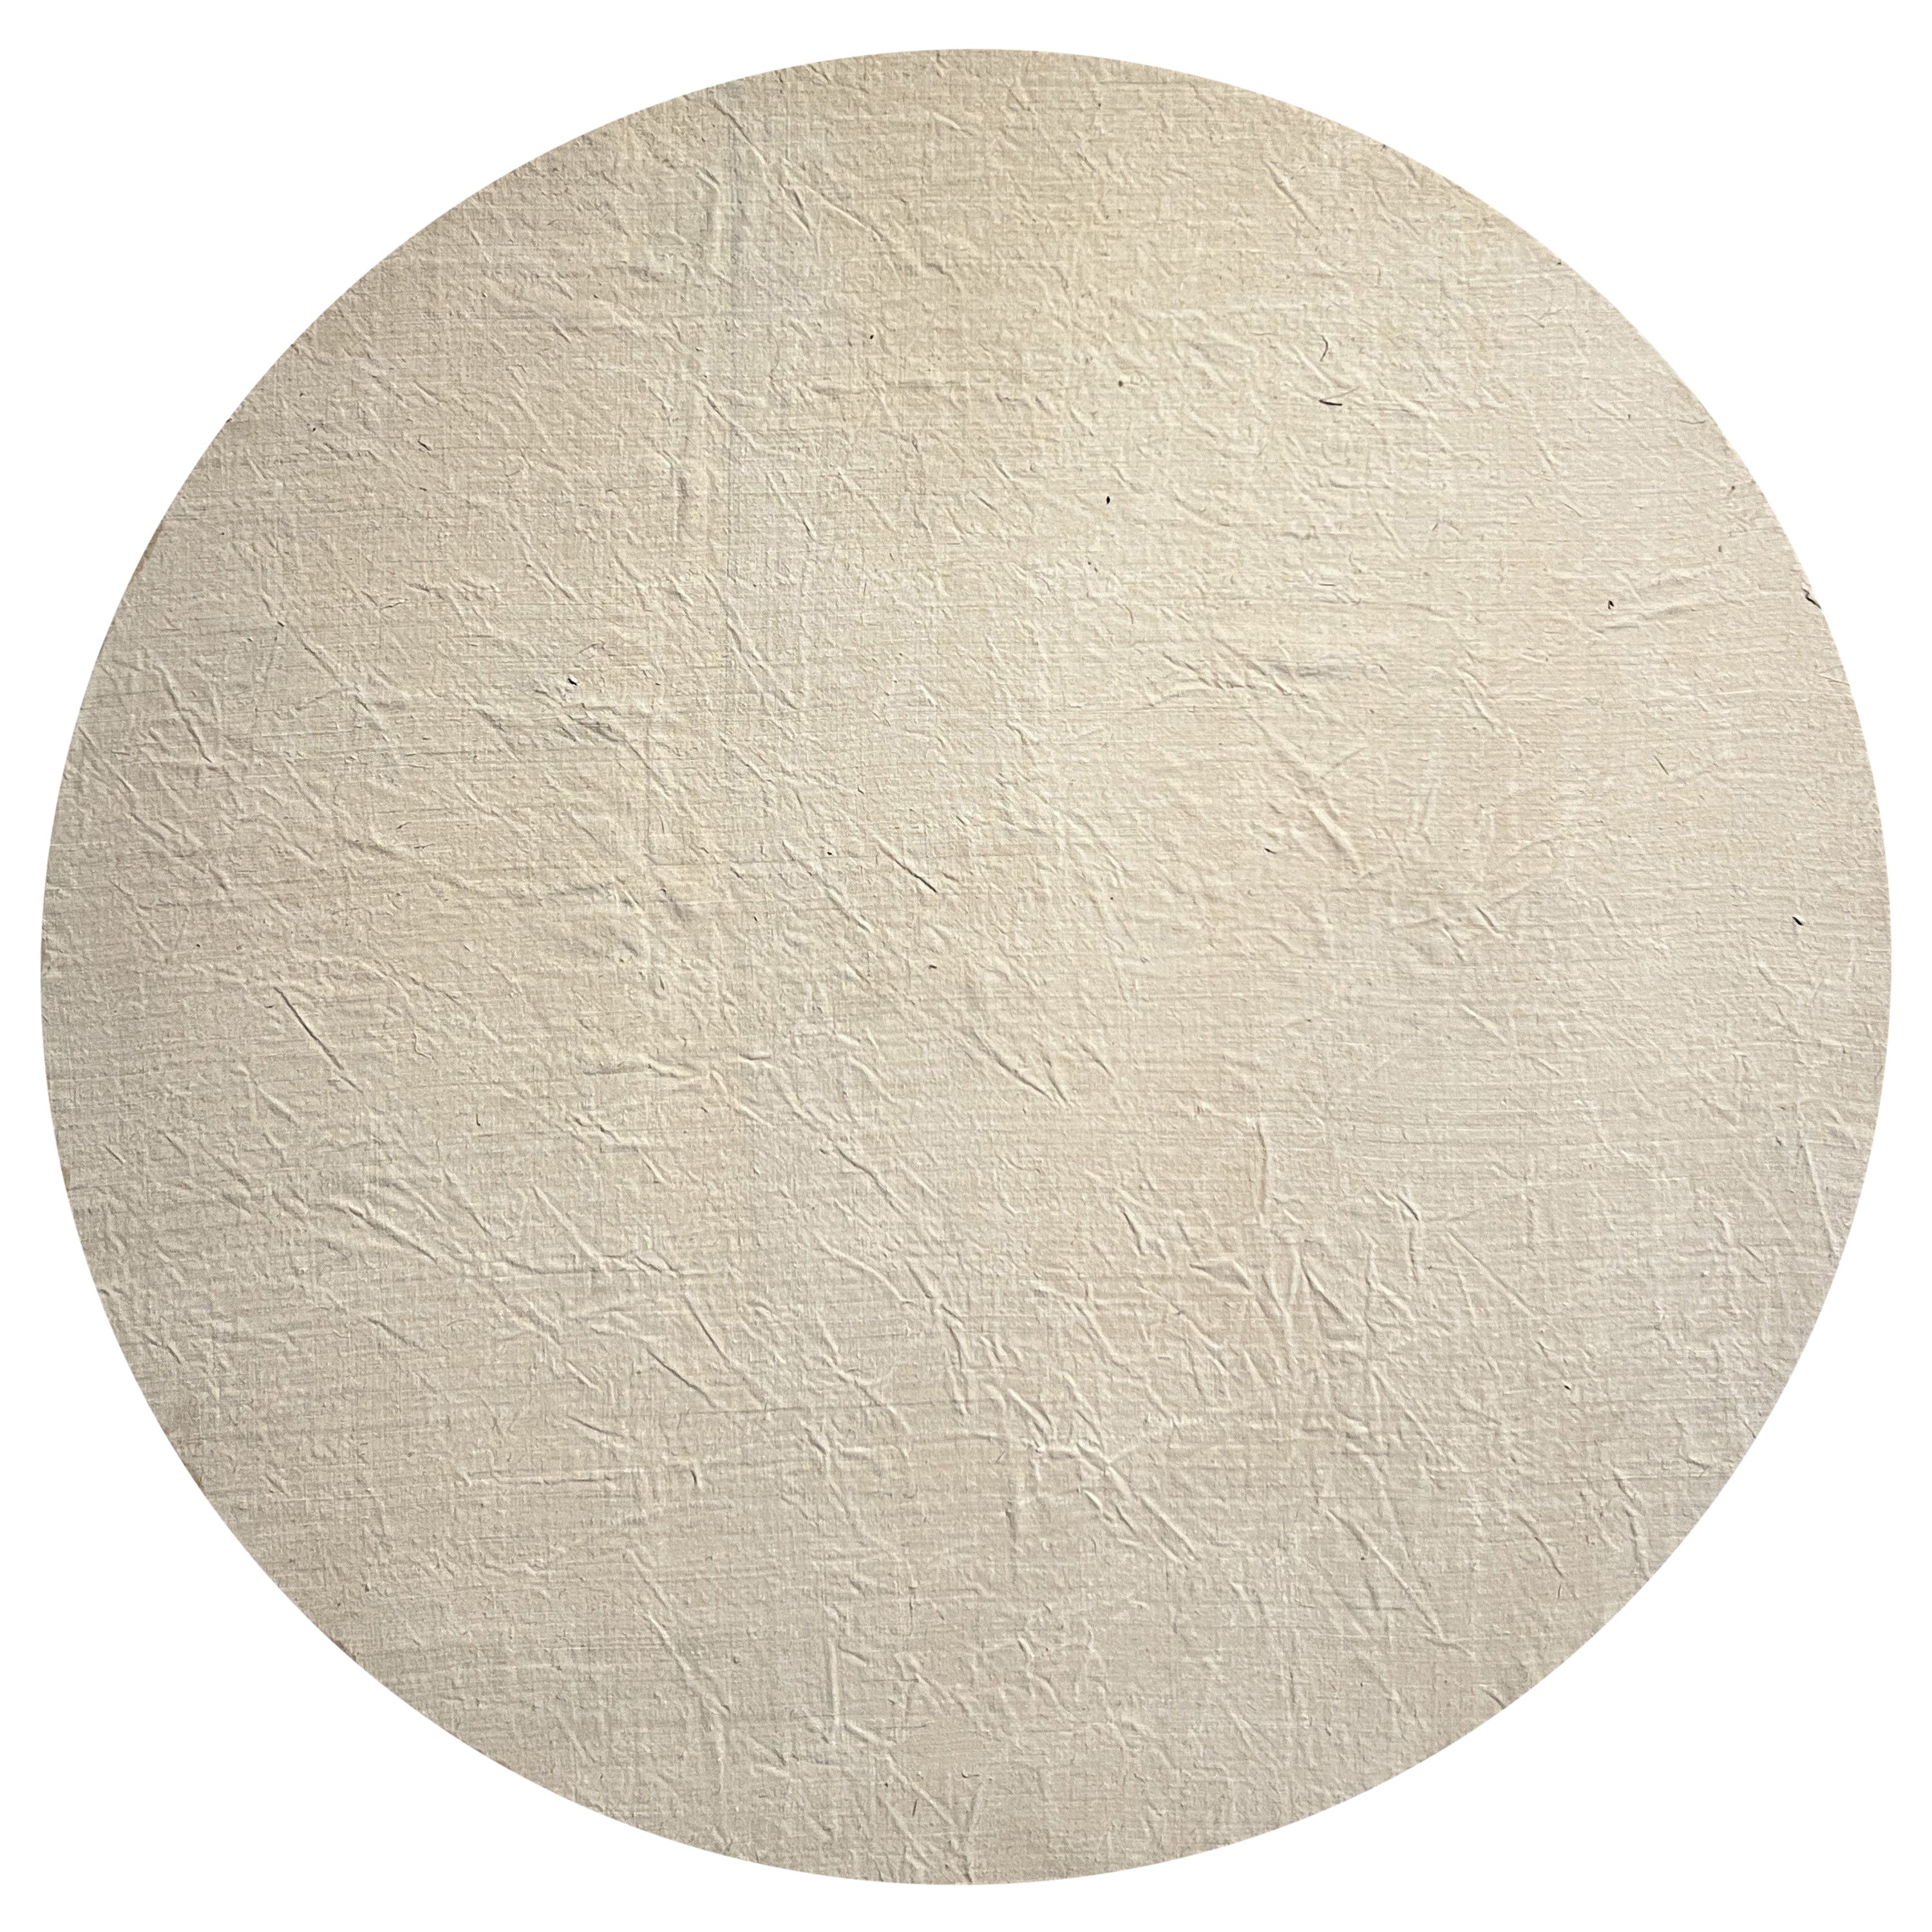 Round painting recycled 18th century linen